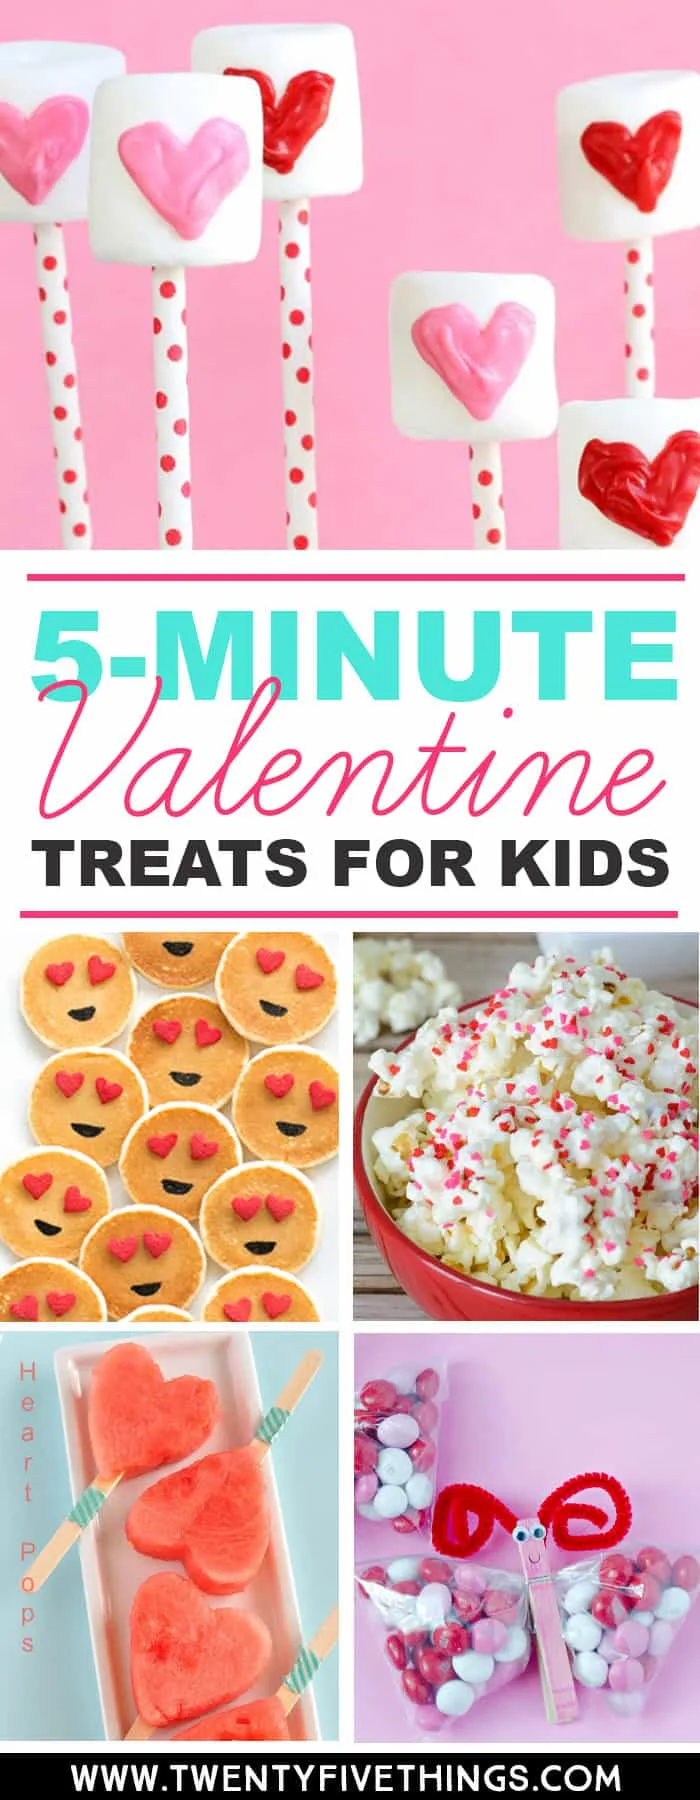 These easy Valentine's Day treats for kids are just right when you're out of time. Make these for classroom Valentine's Day parties or just a special surprise for the kids. #ValentinesDay